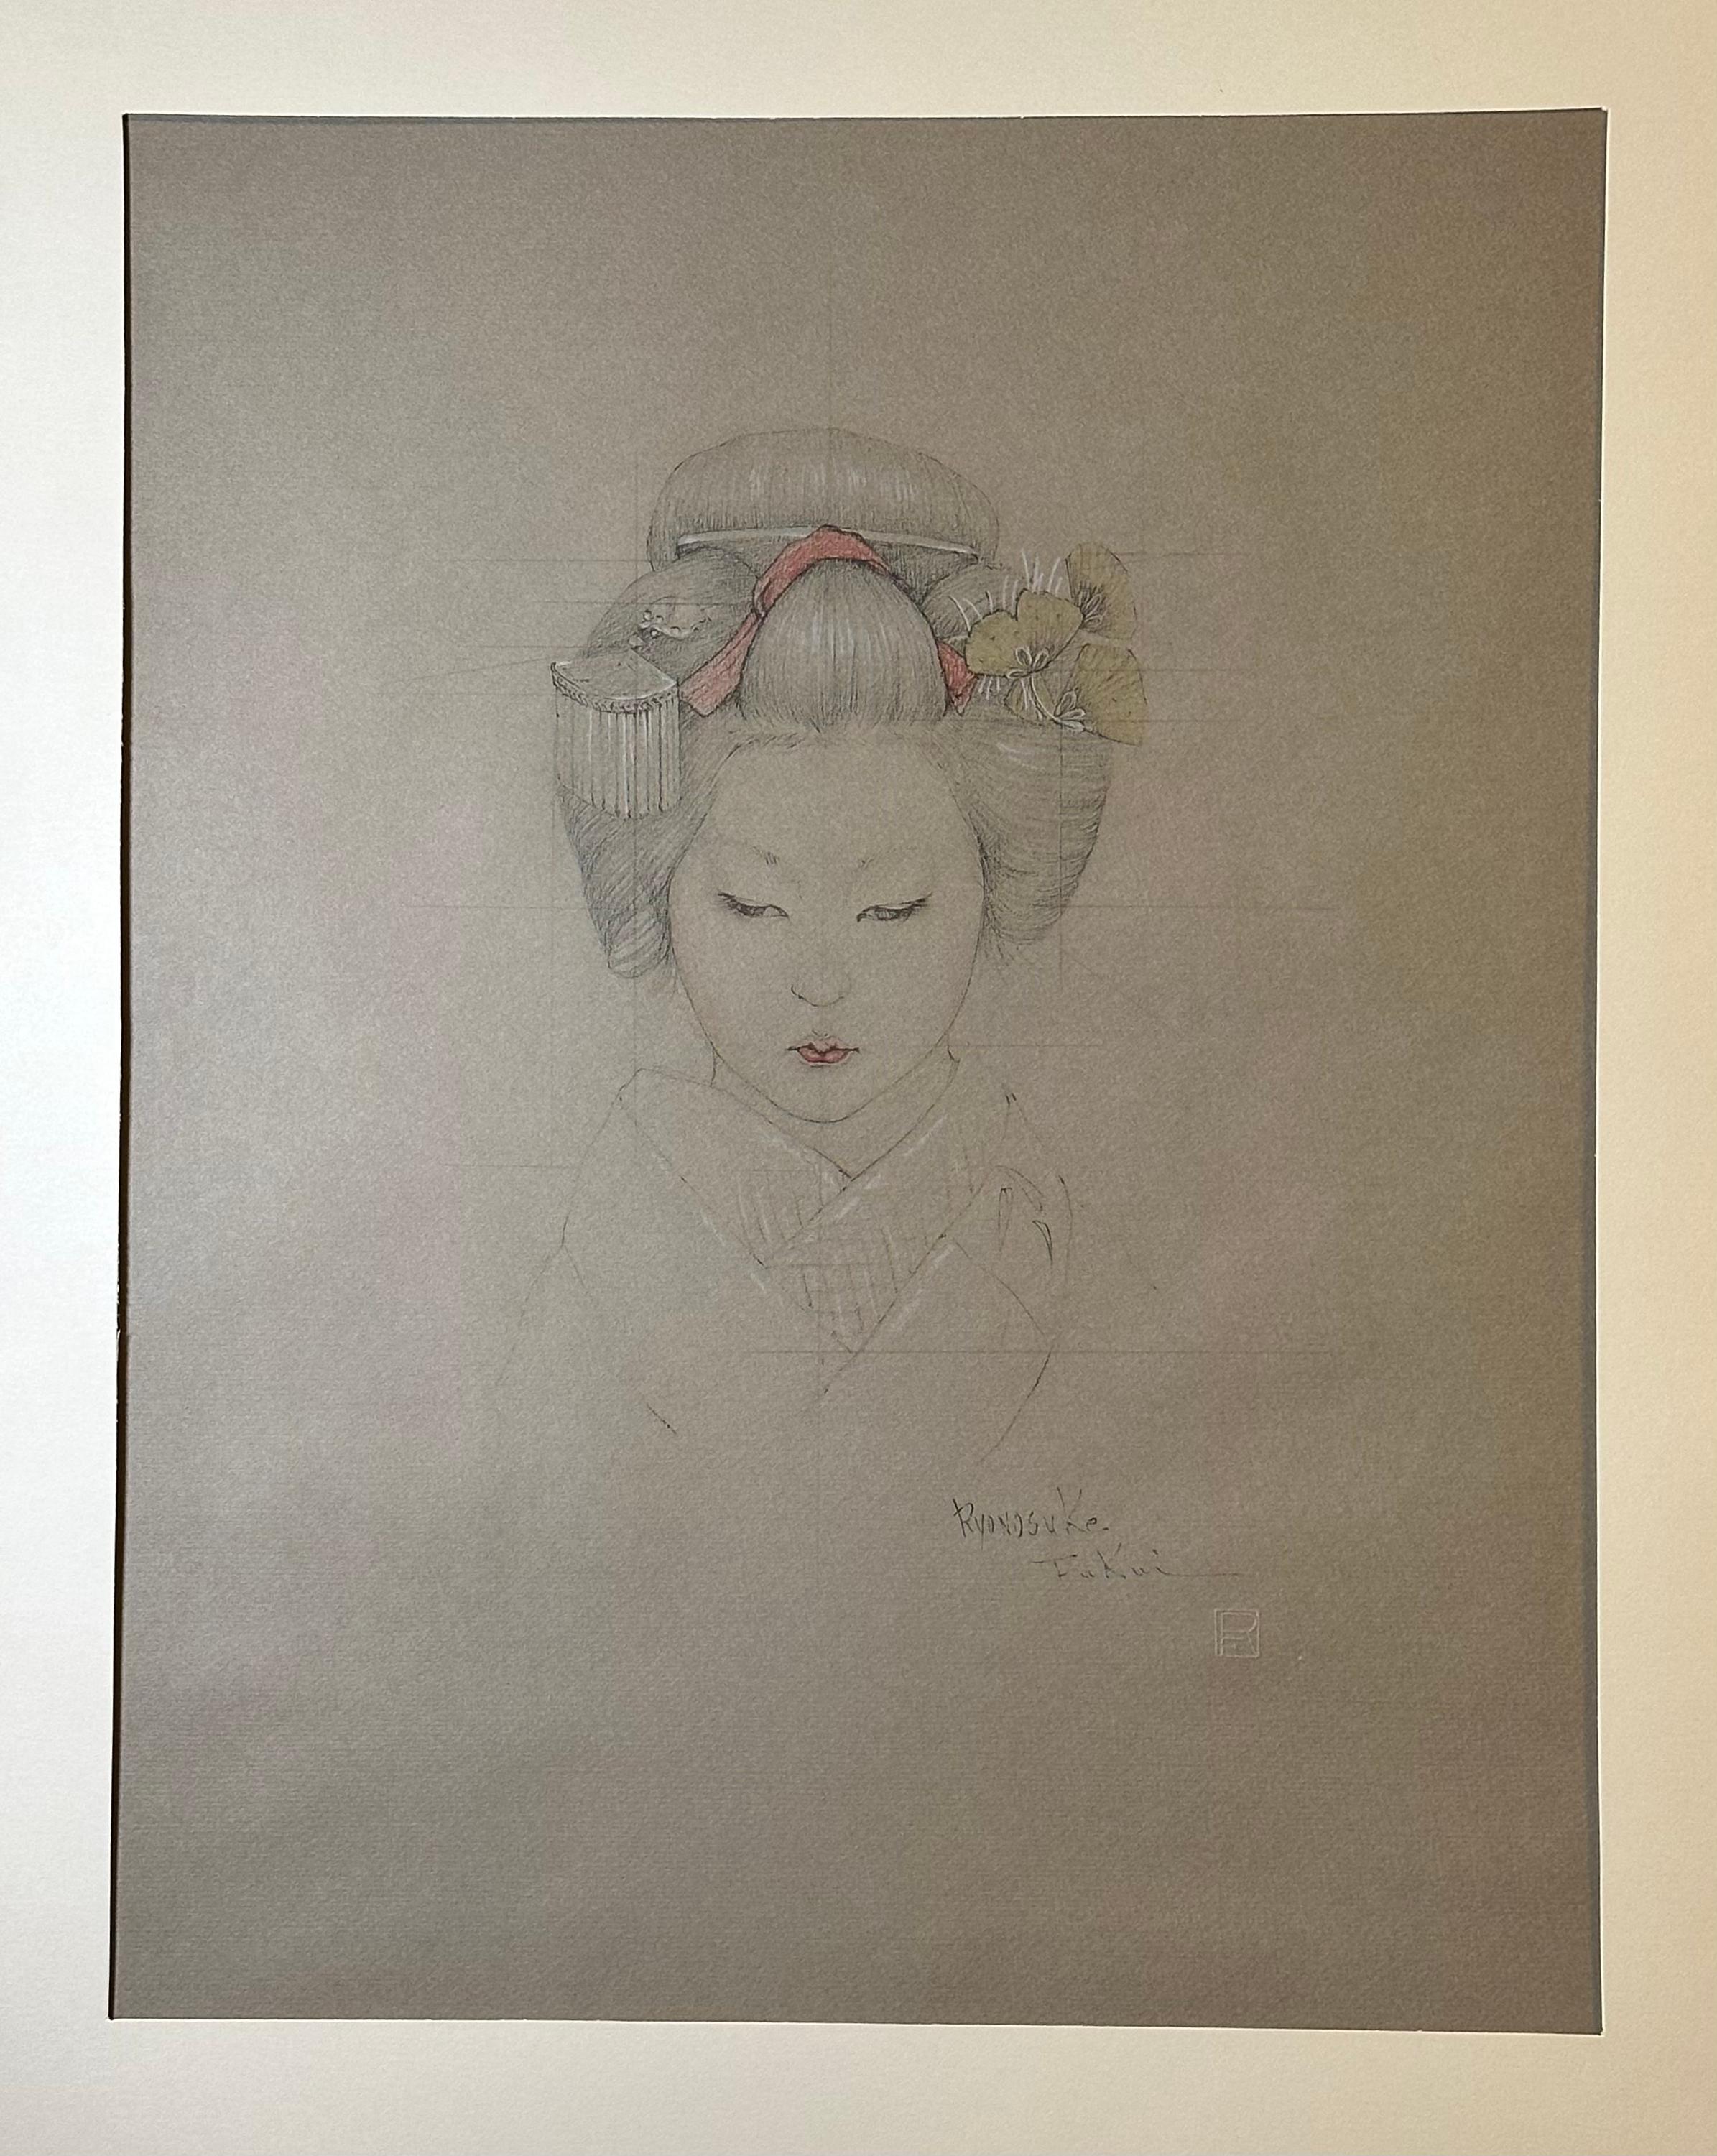 A large print created by Ryunosuke Fukui, a highly acclaimed modernist artist from Japan who lived between 1923 and 1986. Fukui's art has been exhibited in many prestigious museums and galleries, and his works are included in the permanent